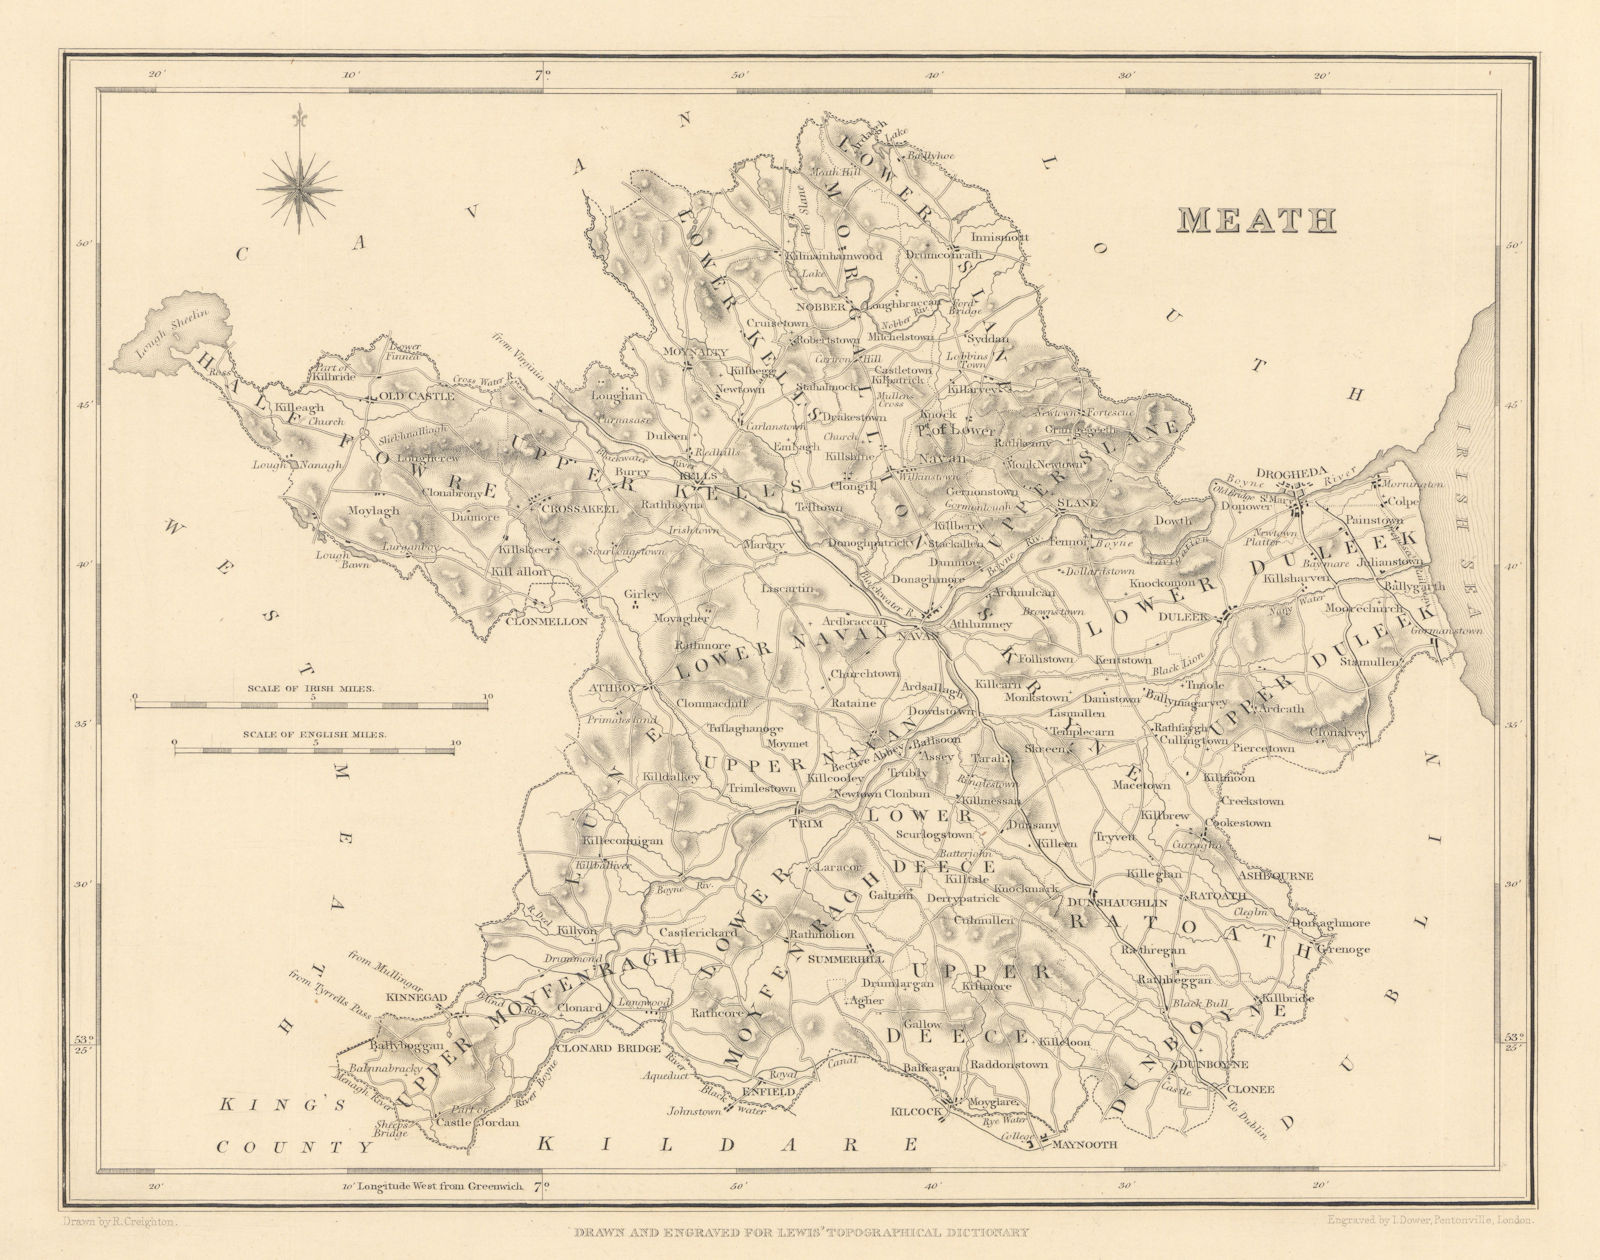 COUNTY MEATH antique map for LEWIS by CREIGHTON & DOWER - Ireland 1837 old